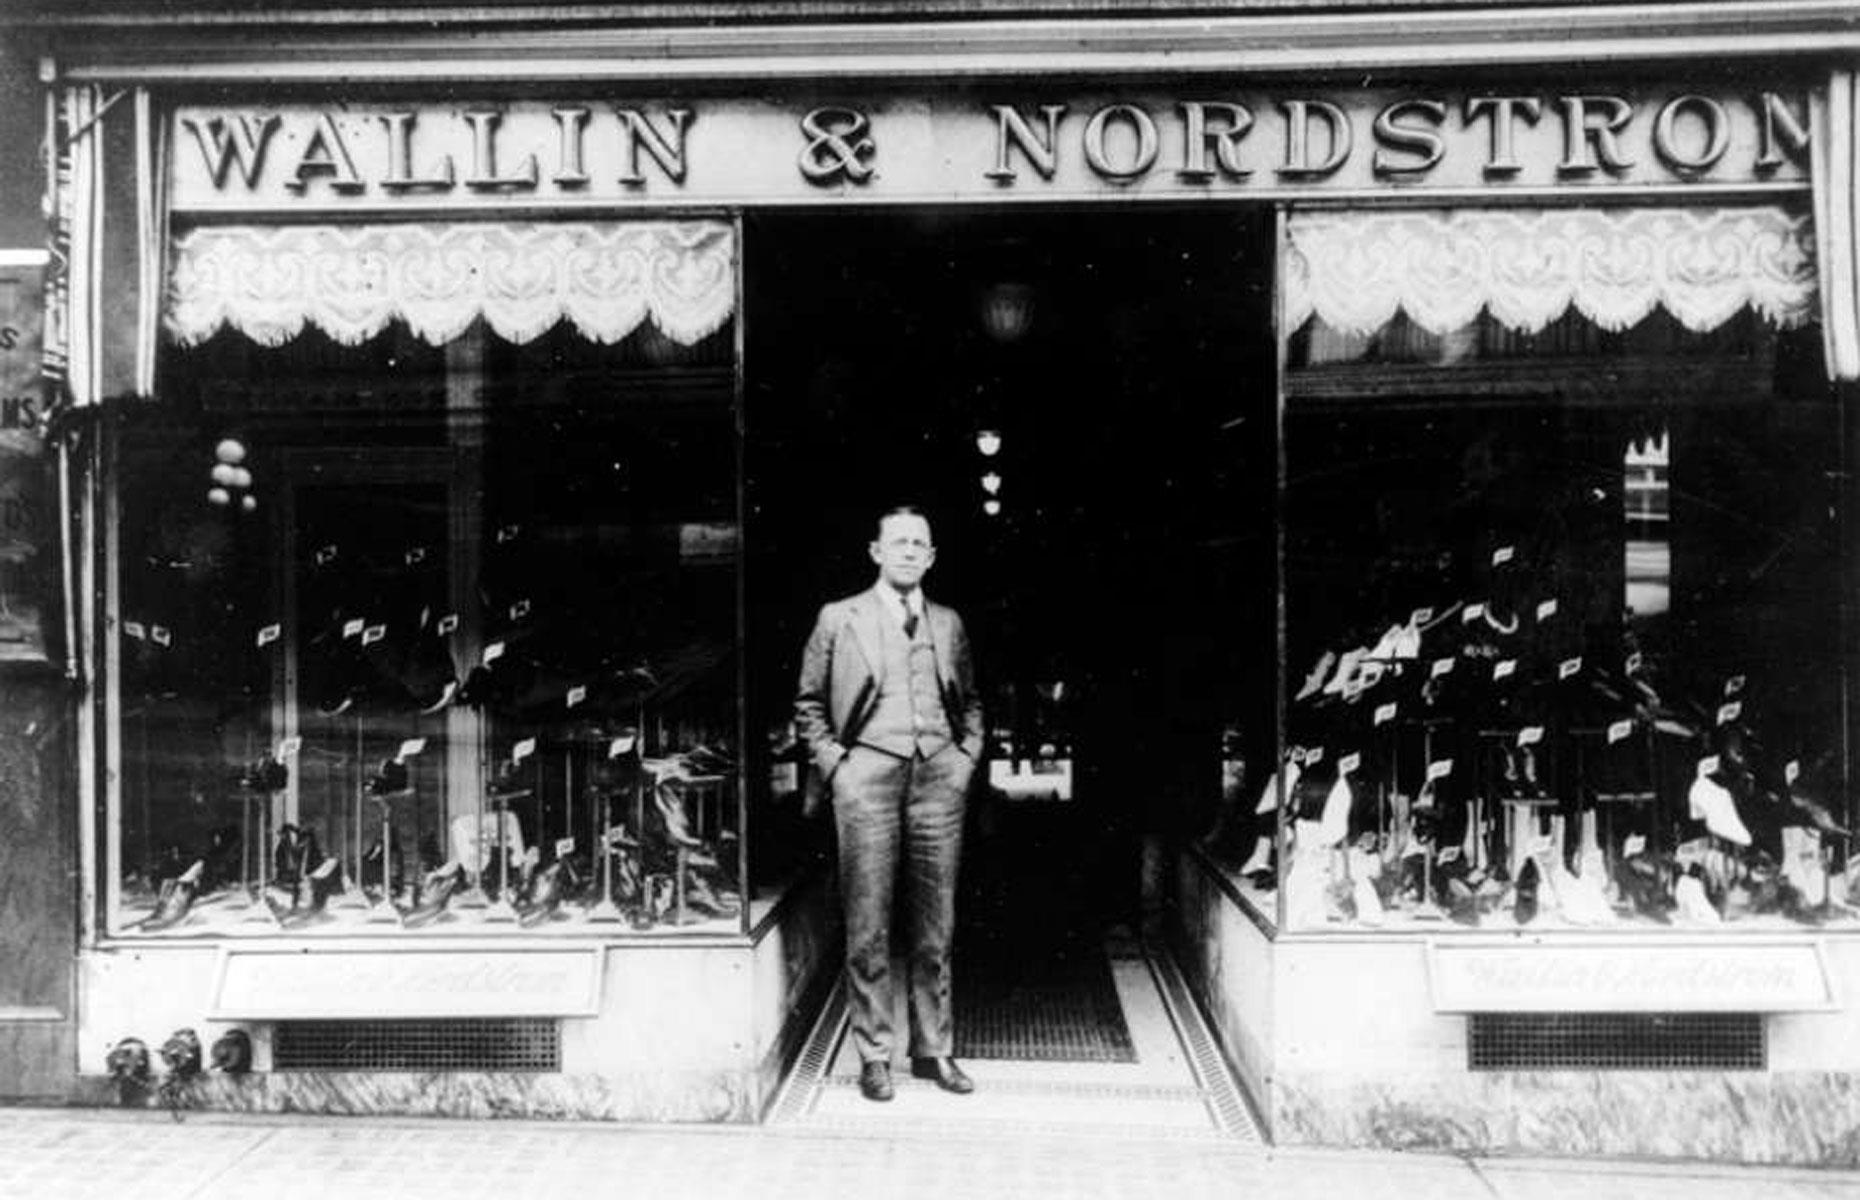 Nordstrom was founded as a small shoe store